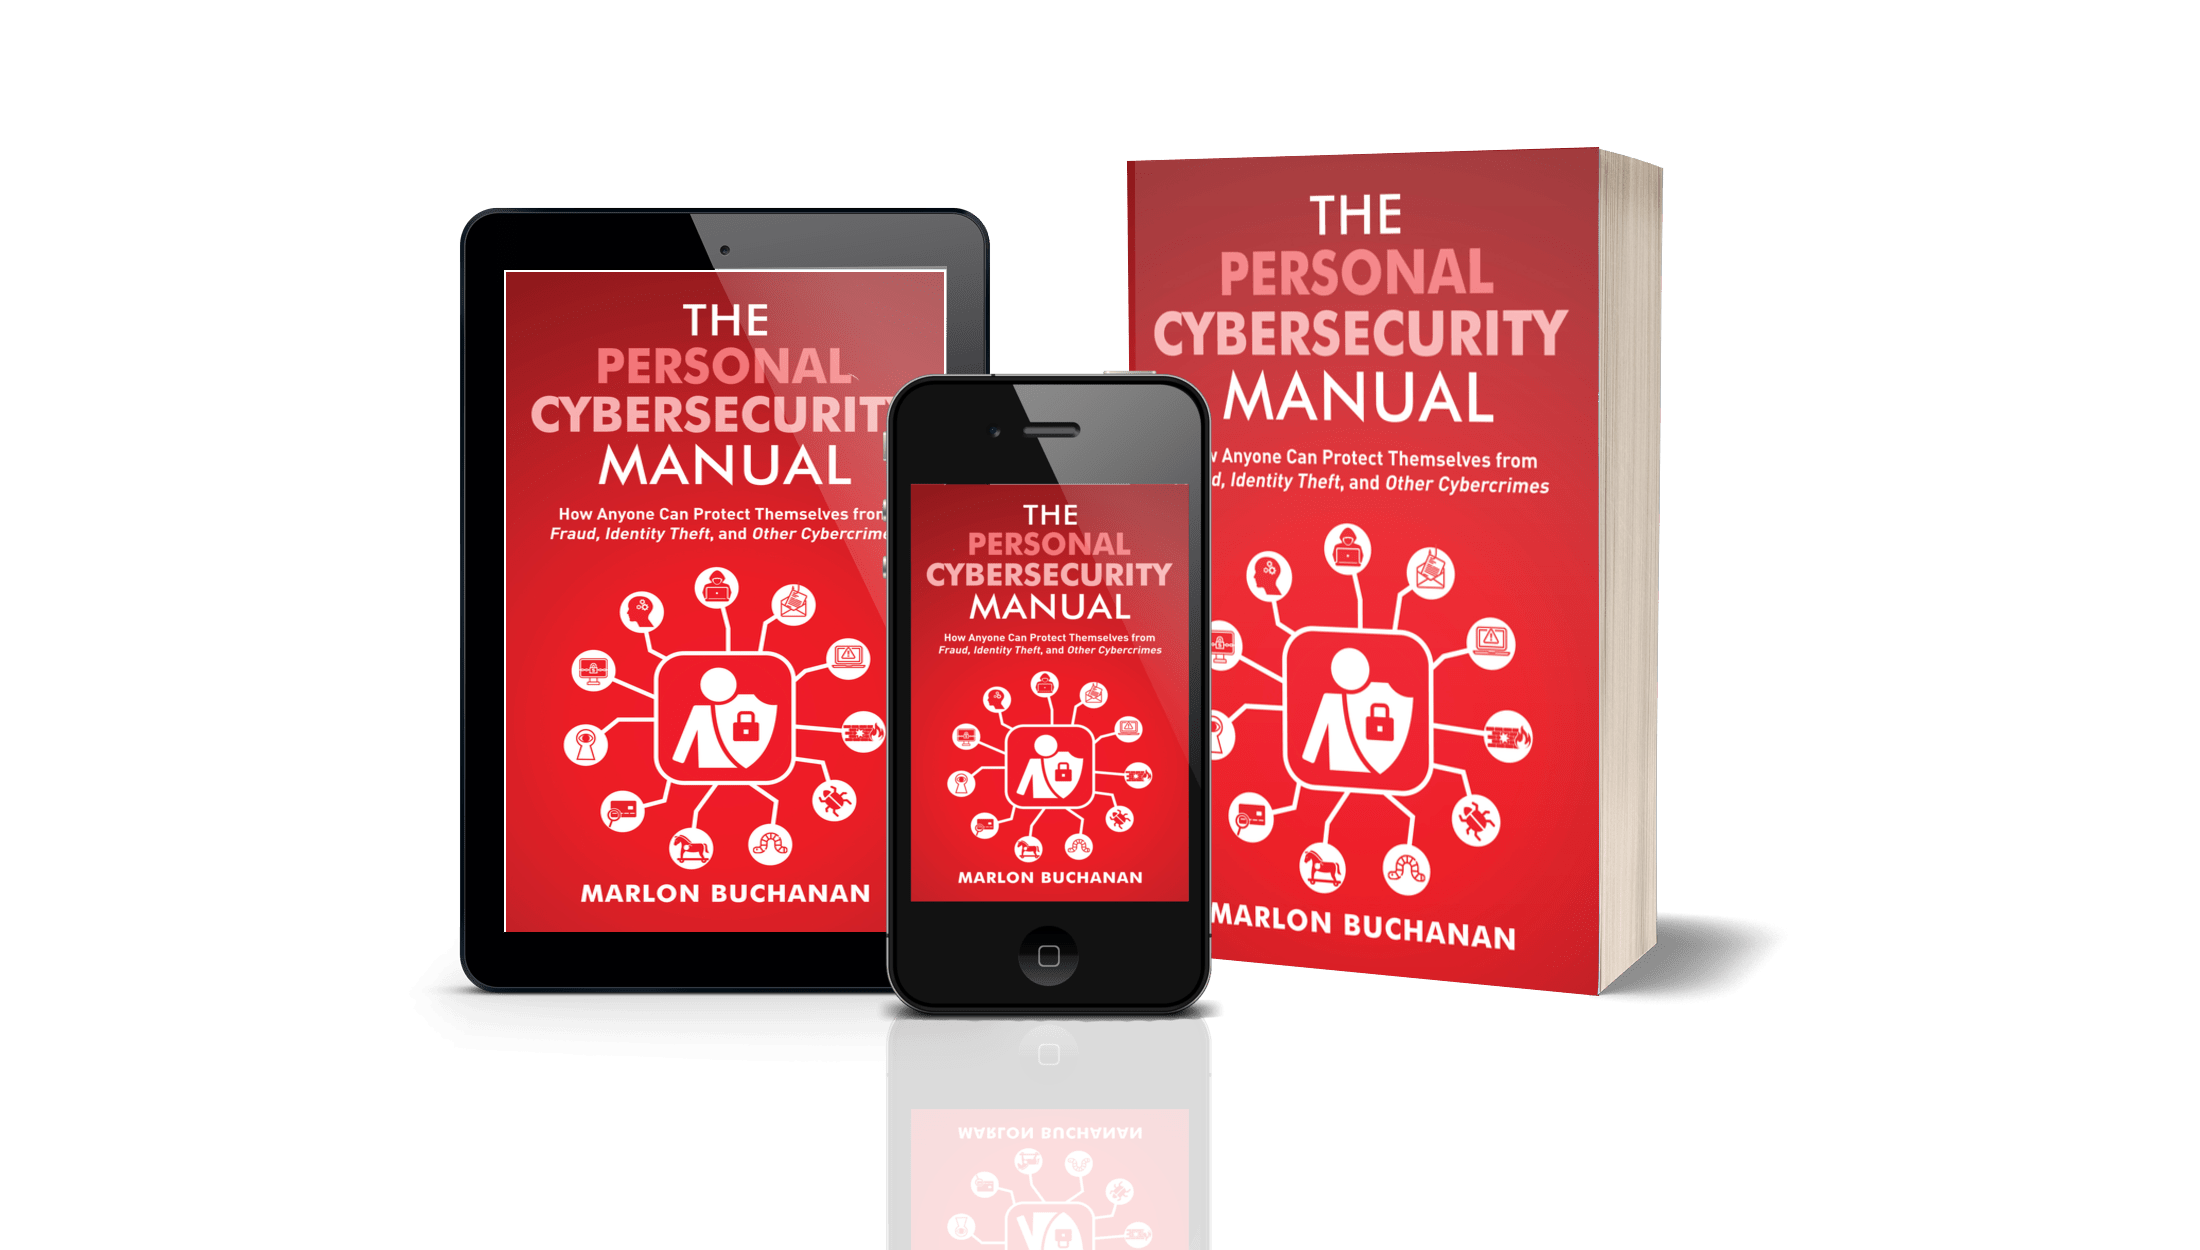 The Personal Cybersecurity Manual